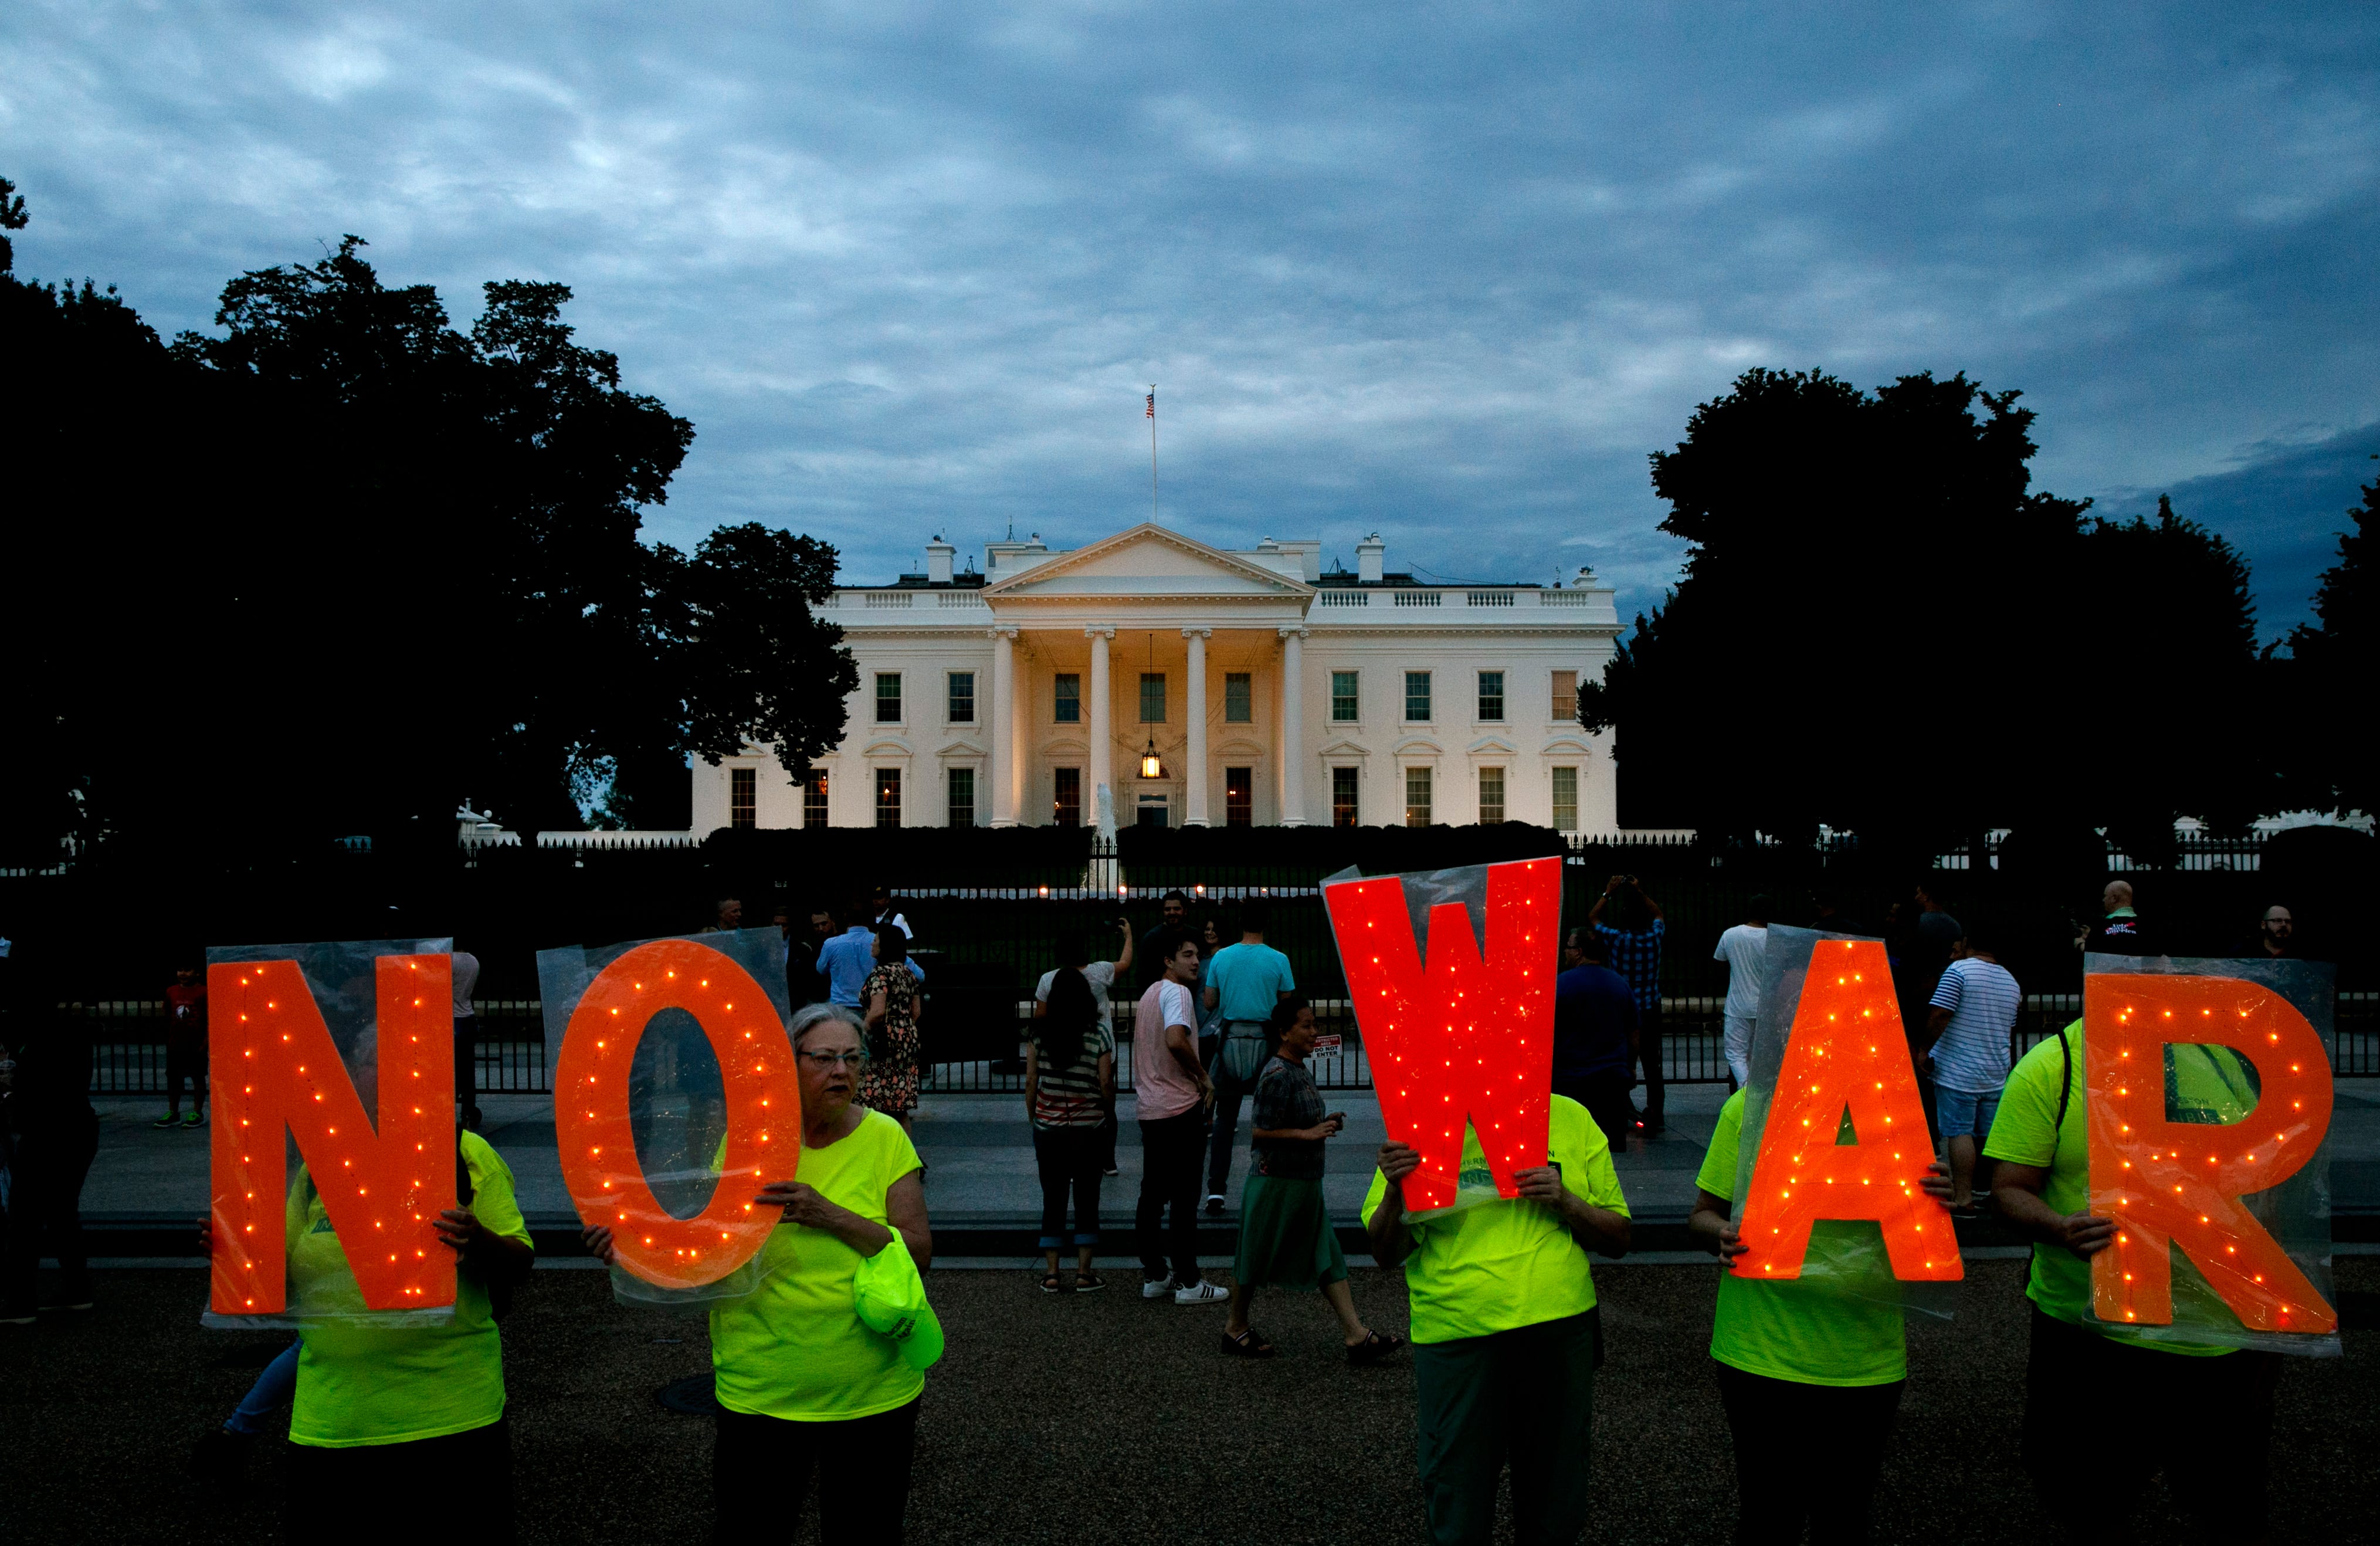 Protesters outside the White House, Thursday June 20, 2019, in Washington, after President Donald Trump tweeted that "Iran made a very big mistake" by shooting down a U.S. surveillance drone over the Strait of Hormuz in Iran.